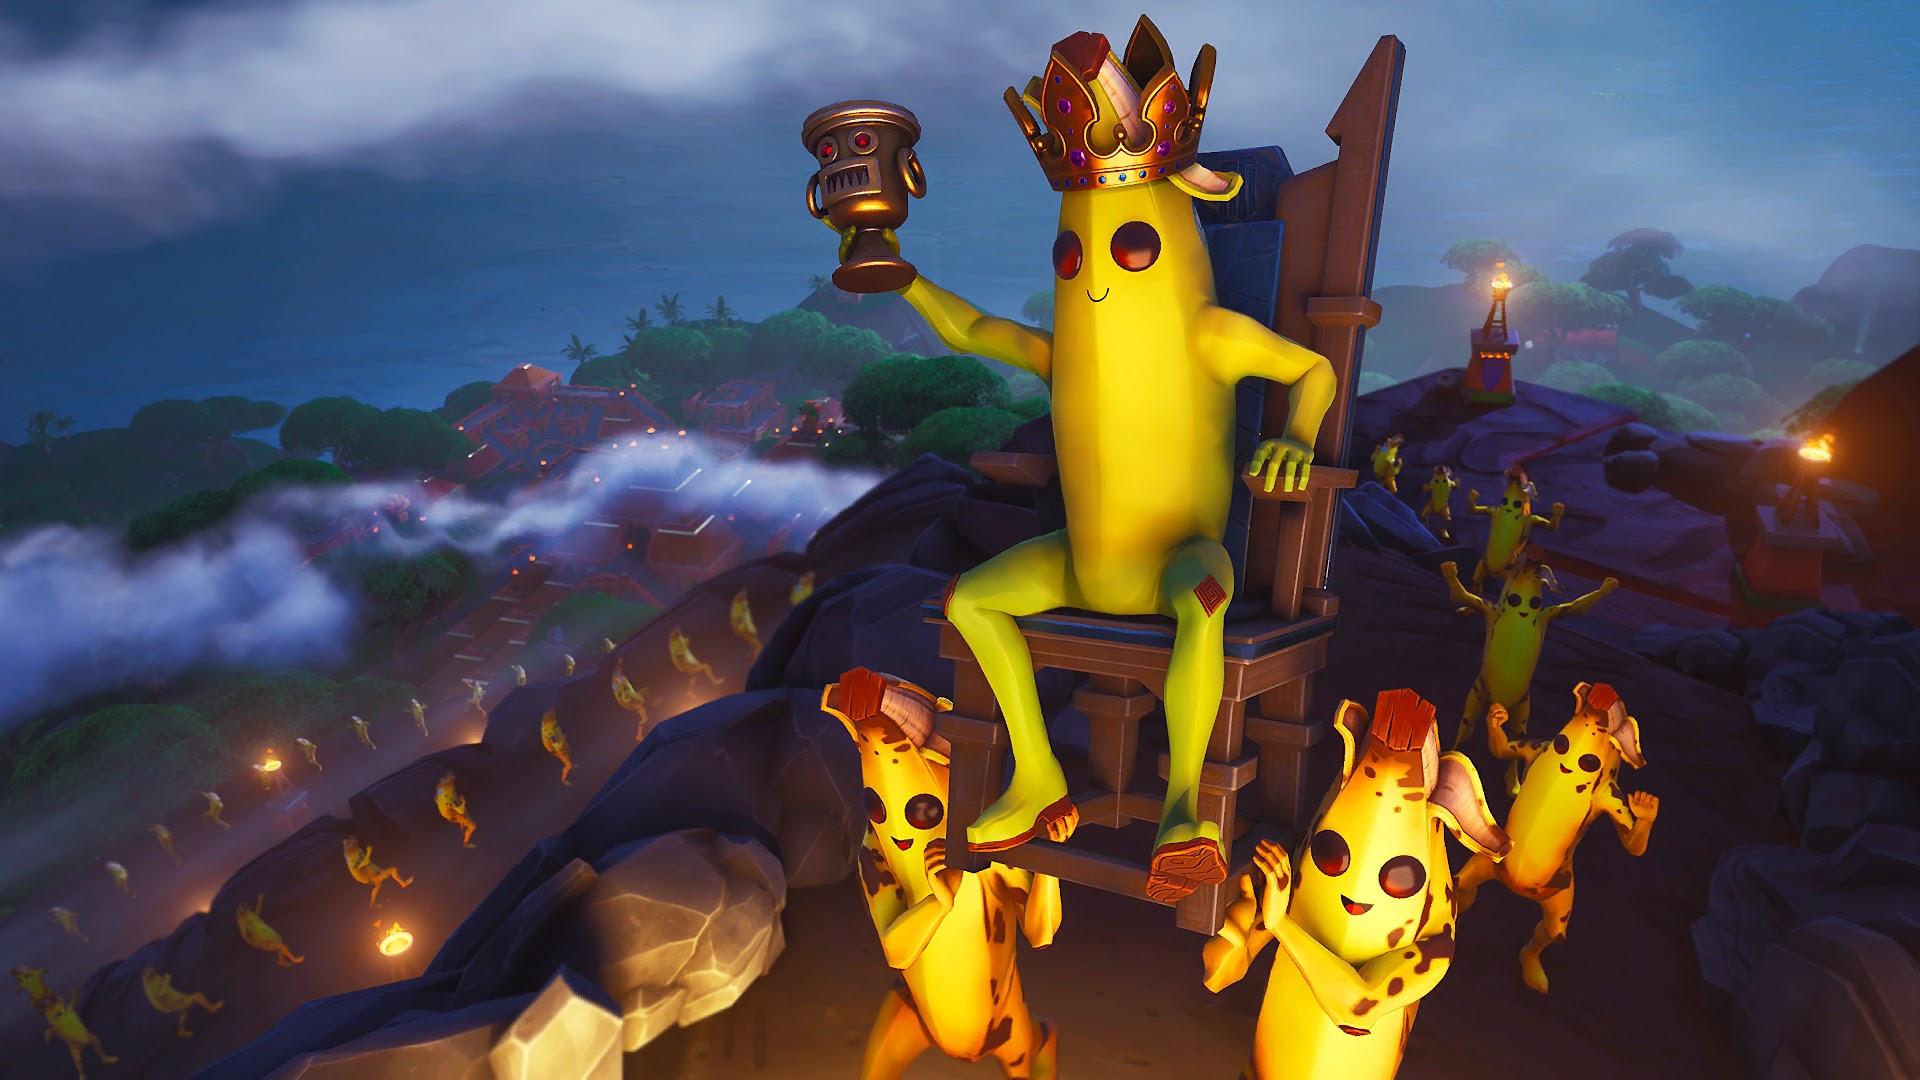 How To Get Peely in Fortnite? + Wallpaper of This Popular Skin